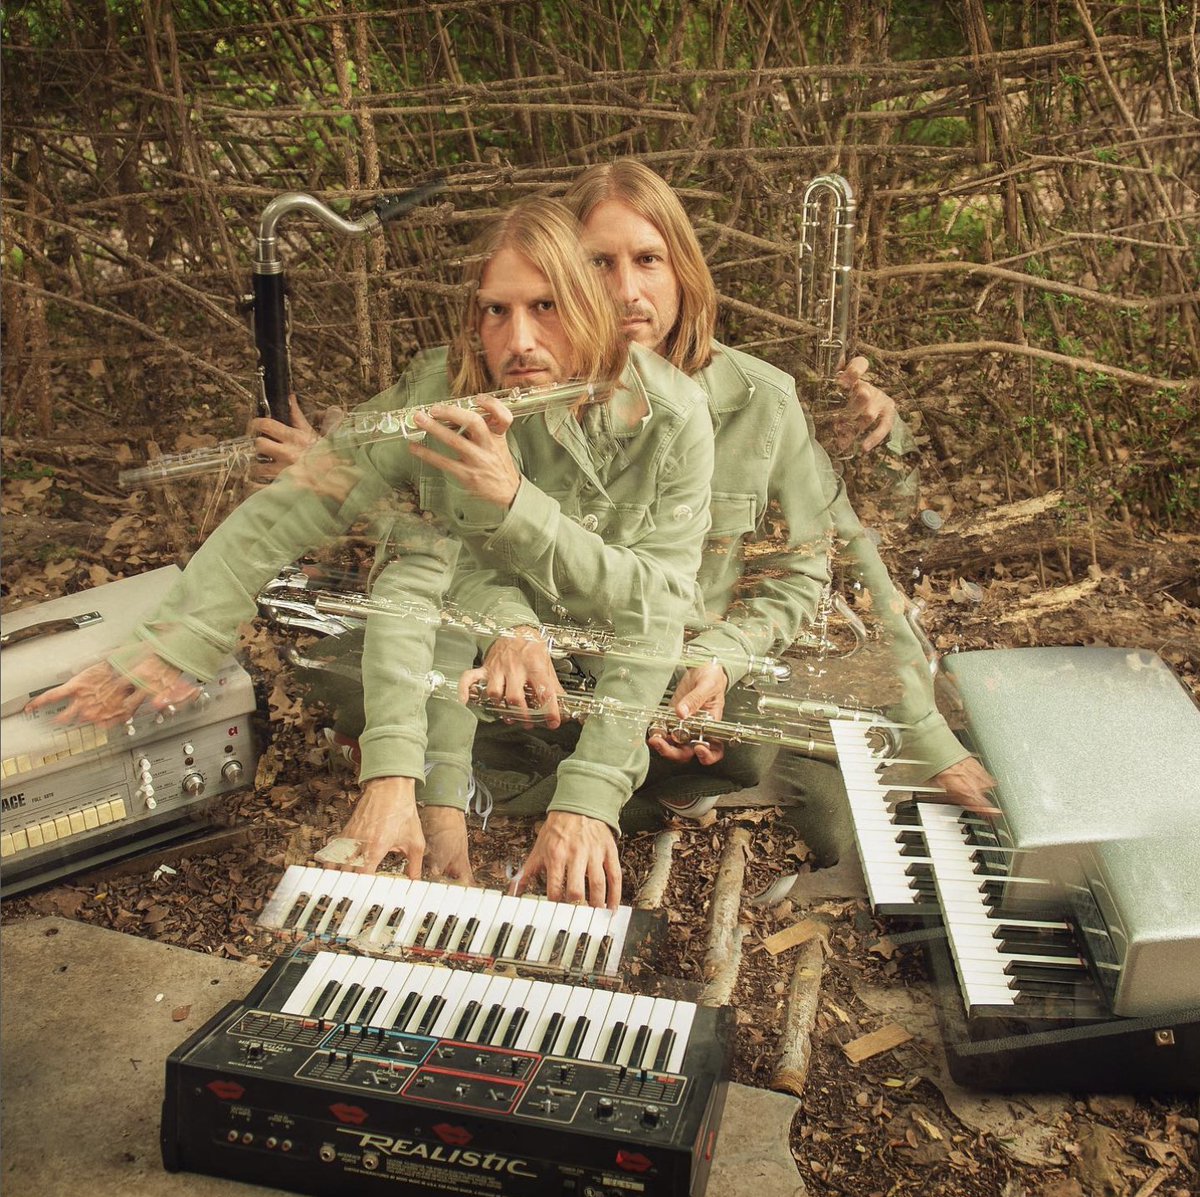 Pneumatic Tubes is opening for @beth_orton on Wednesday 9/13, presented by @CatsCradleNC and @wuncmusic! Make sure to come out early for his set! Tickets: bit.ly/BethOrton-Sep13